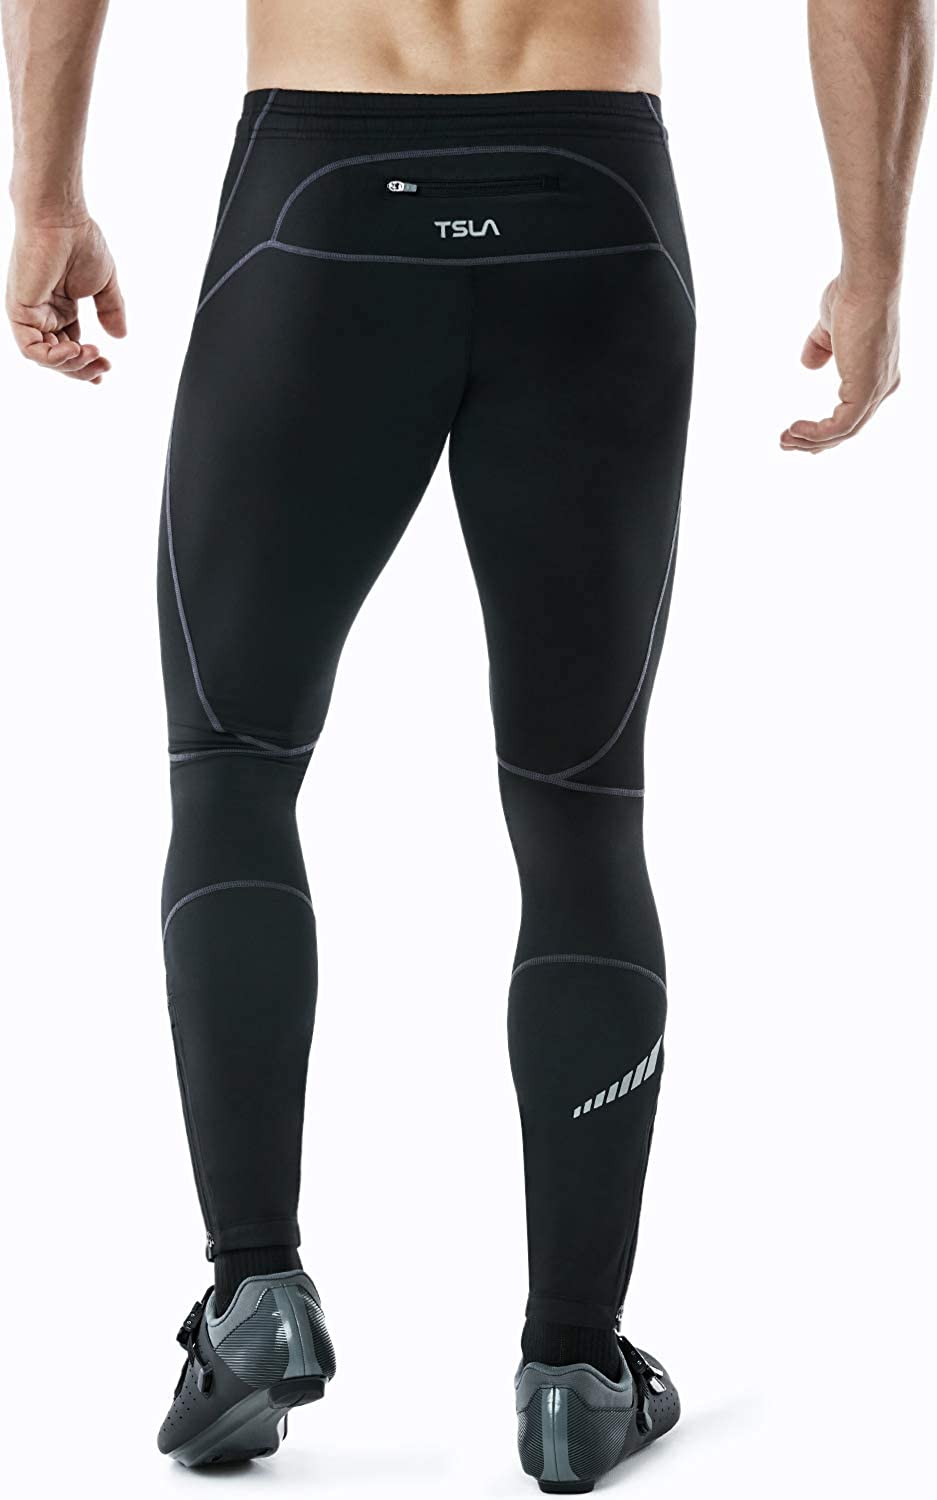 TSLA Men's Thermal Running Tights, Athletic Cycling Pants, Fleece Lined ...